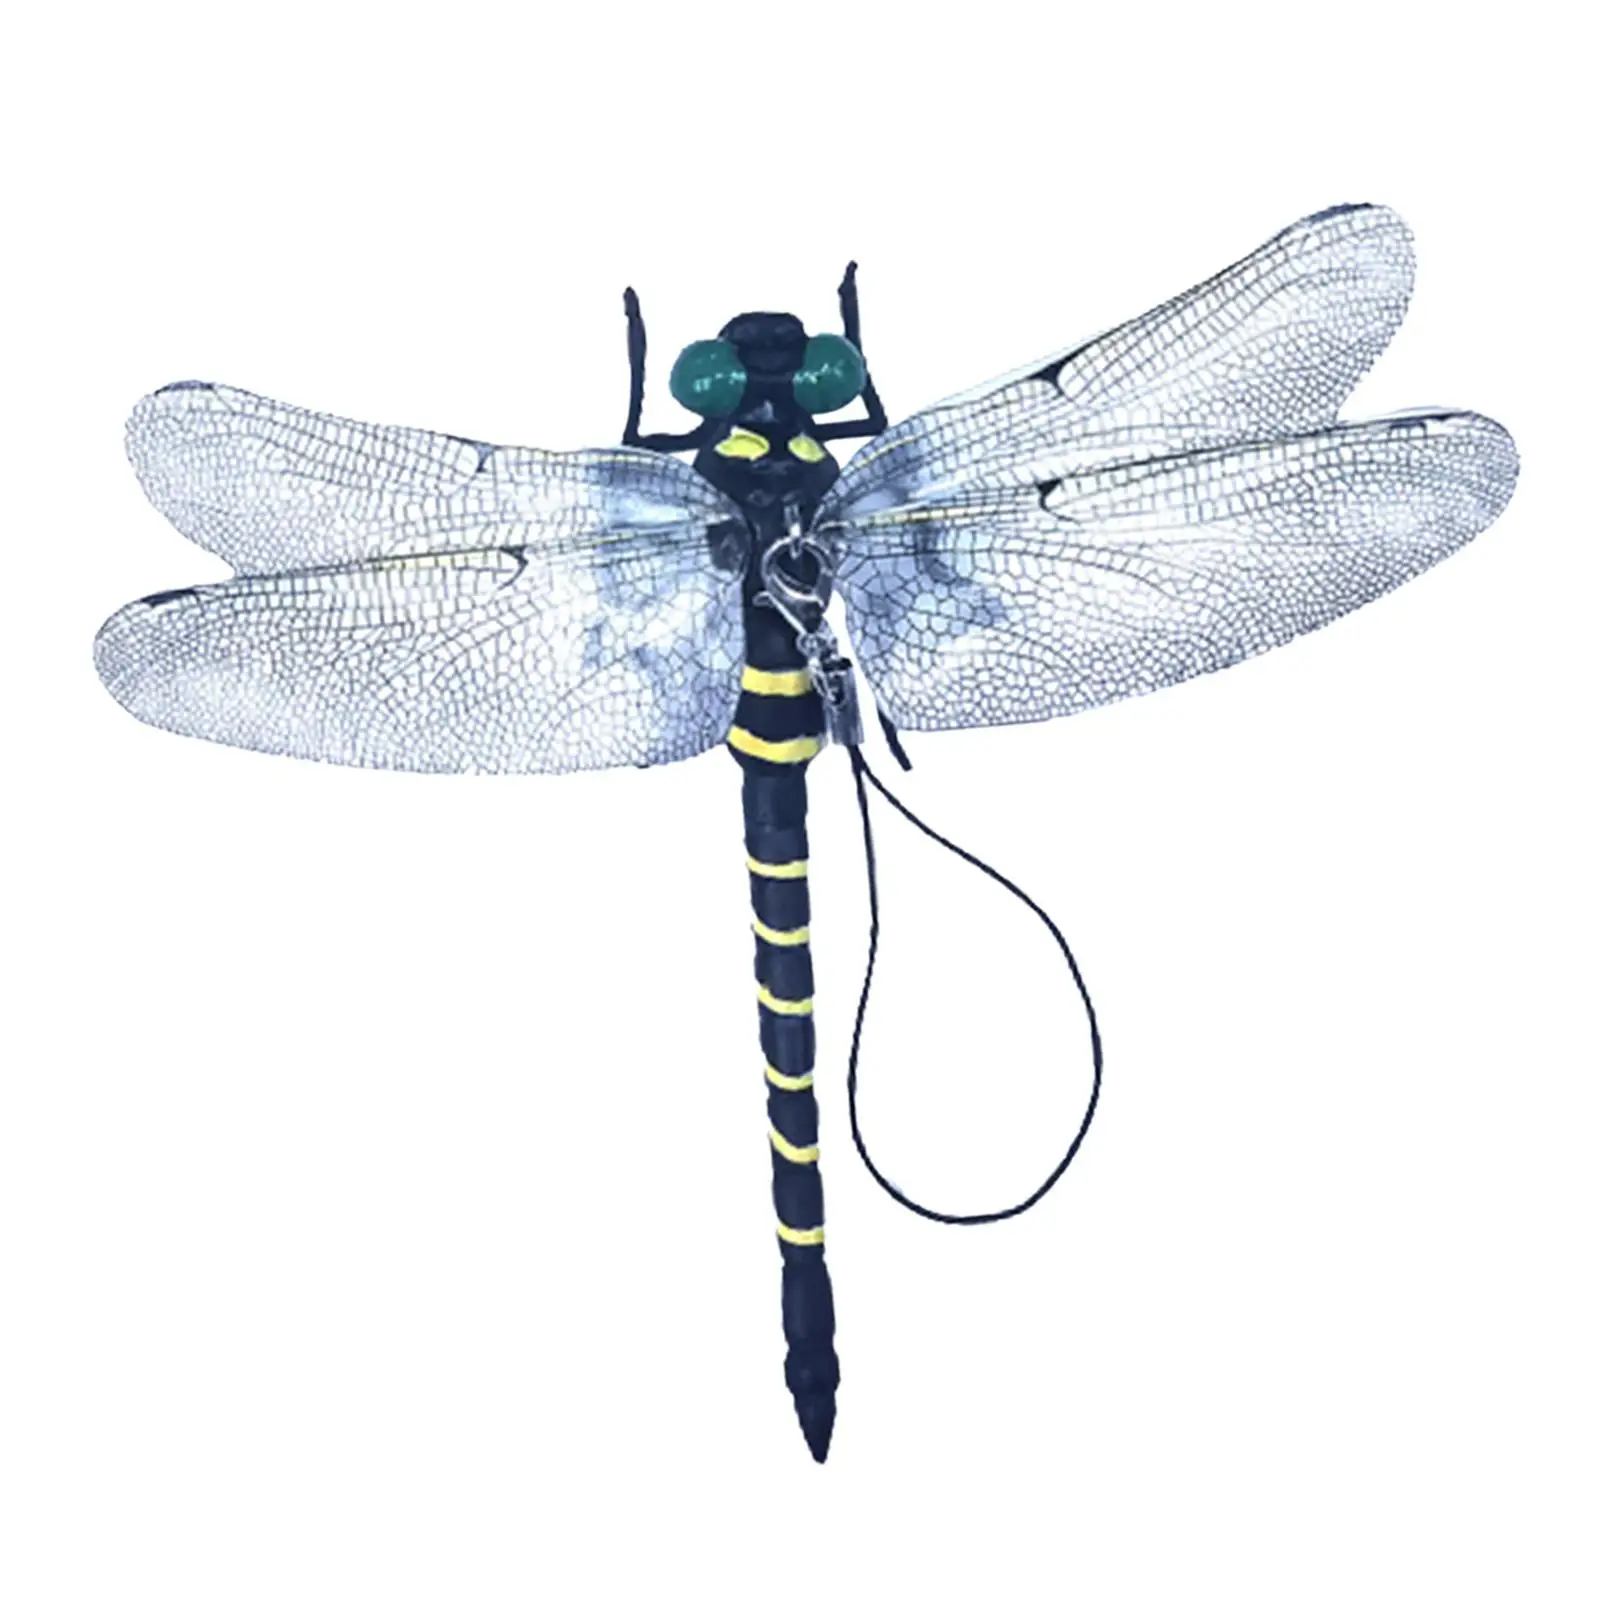 Dragonfly Figure Flies Crafts Realistic Dragonfly Figure for Trees